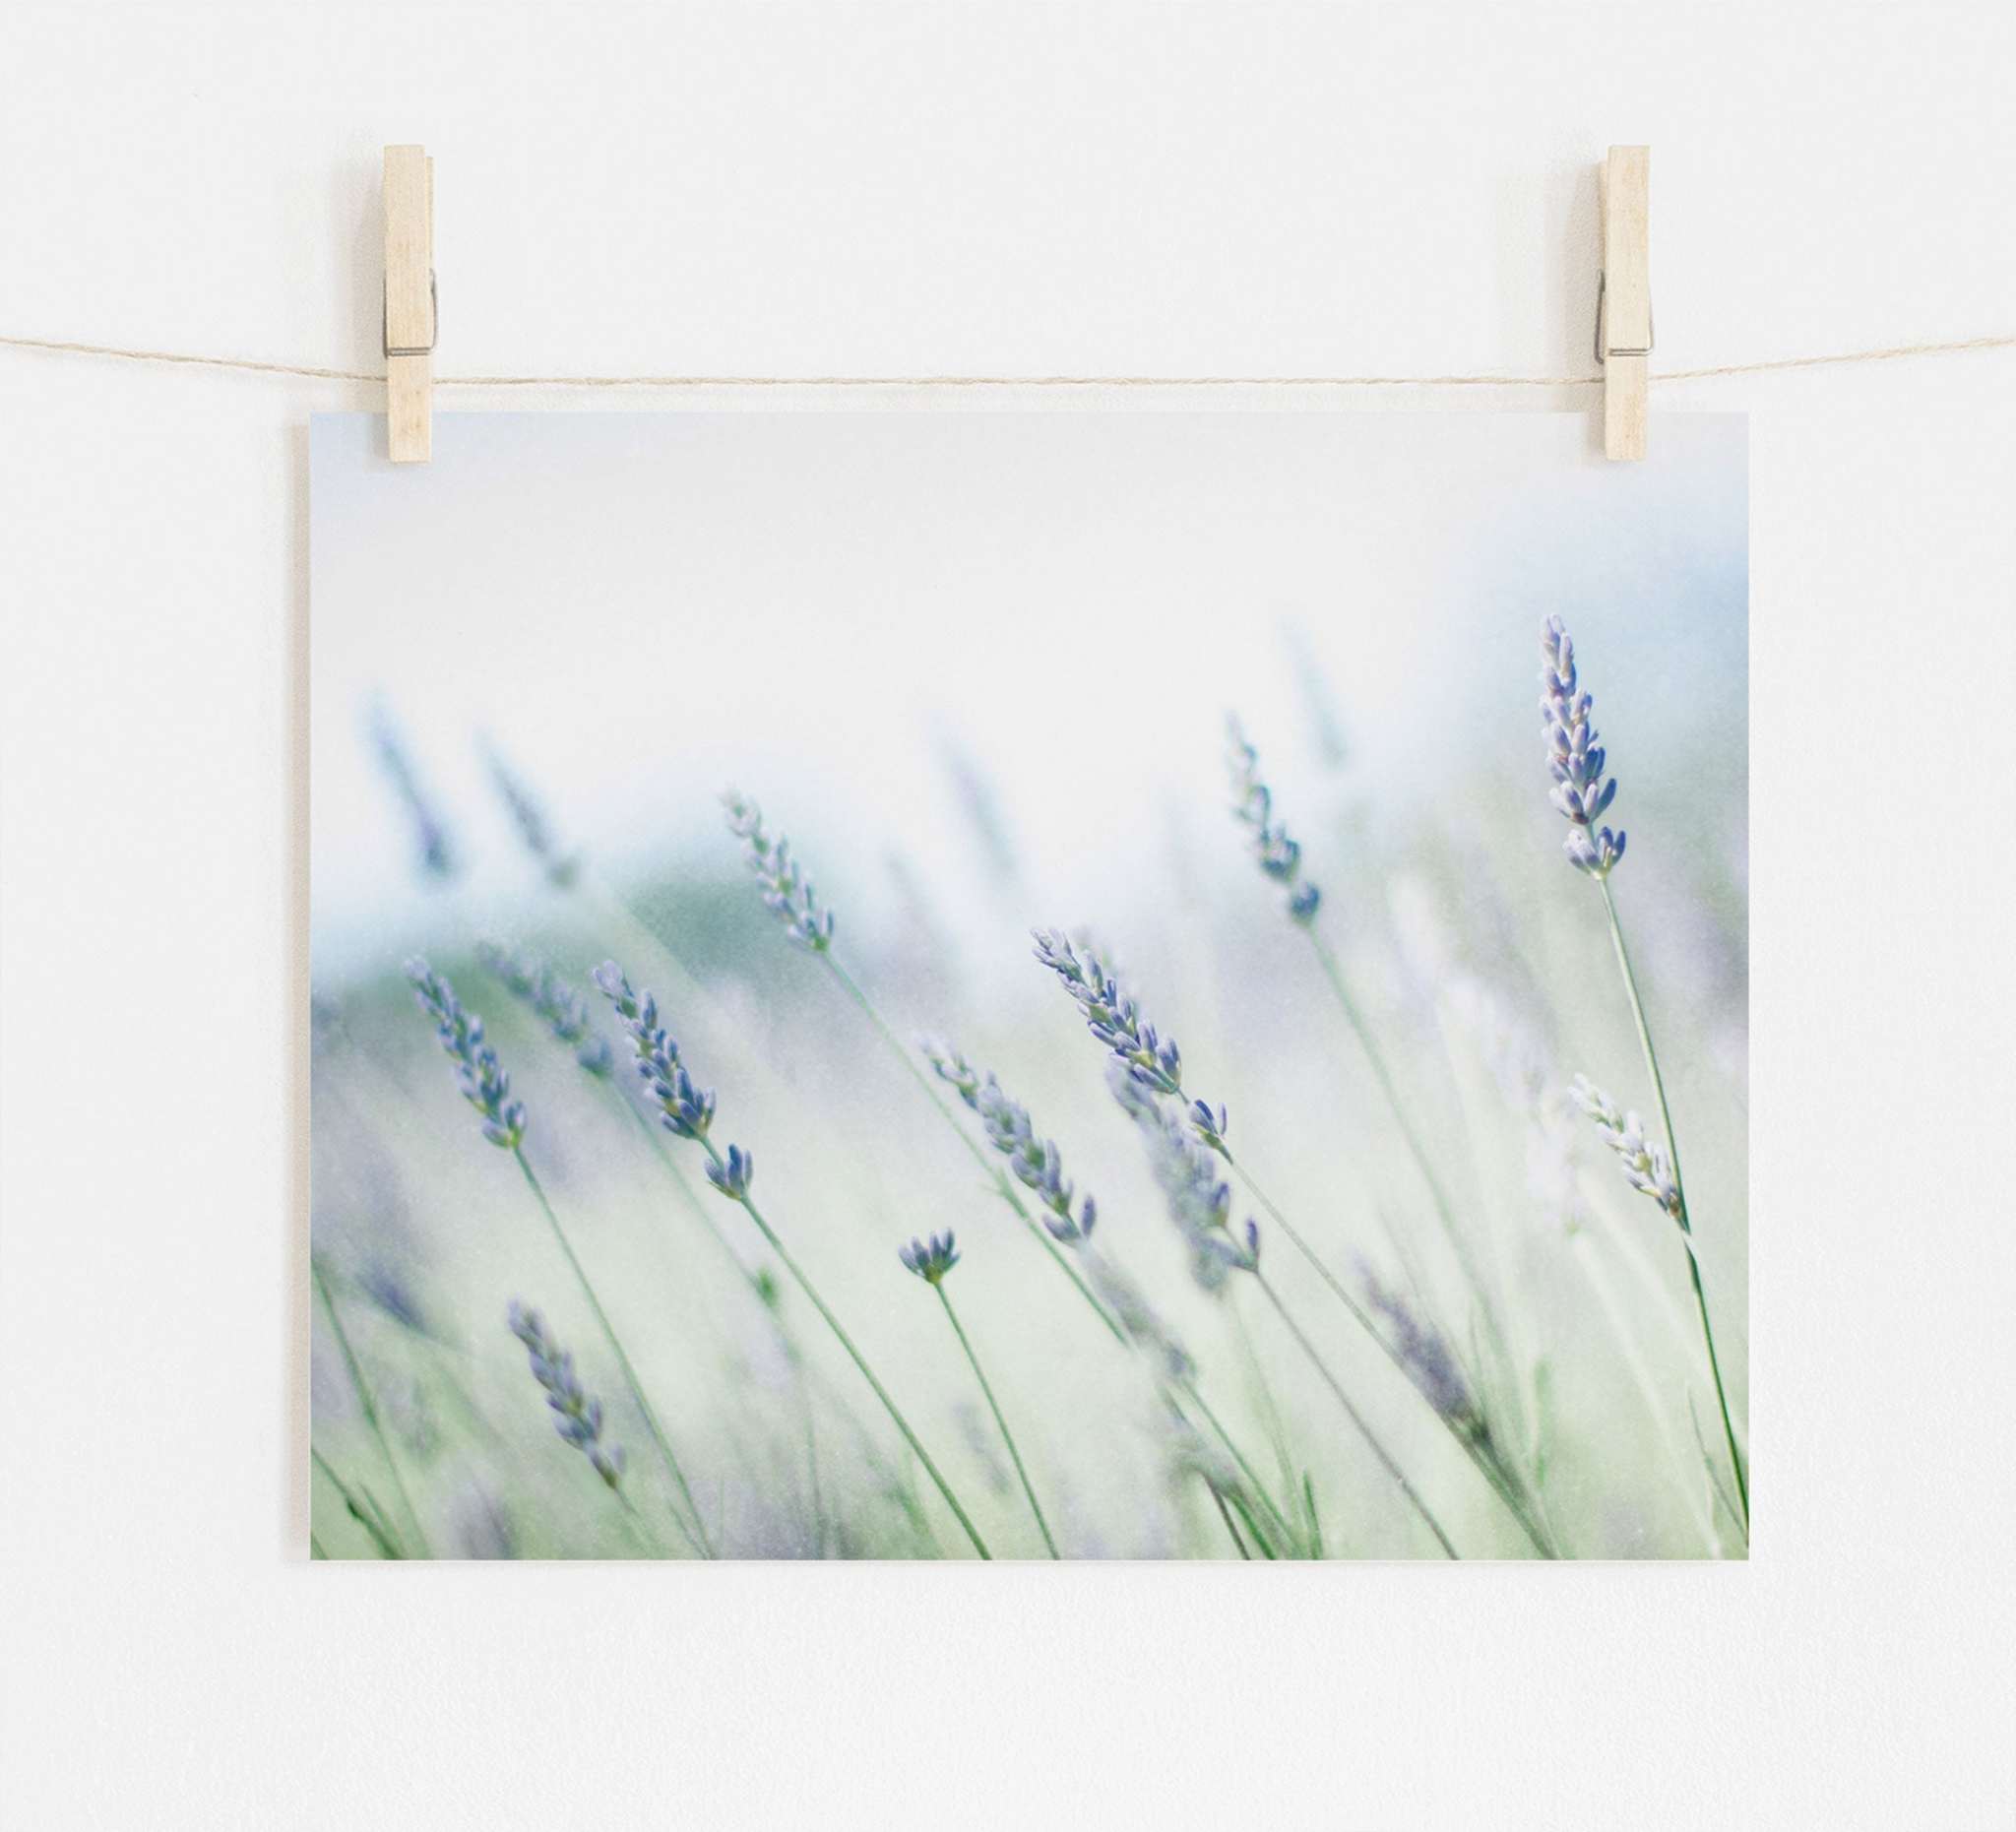 Photograph of Offley Green&#39;s Rustic Farmhouse Floral Wall Art, &#39;Buds of Lavender&#39; clipped to a string with wooden clothespins against a white wall background, conveying a serene and artistic presentation, printed on archival photographic paper.